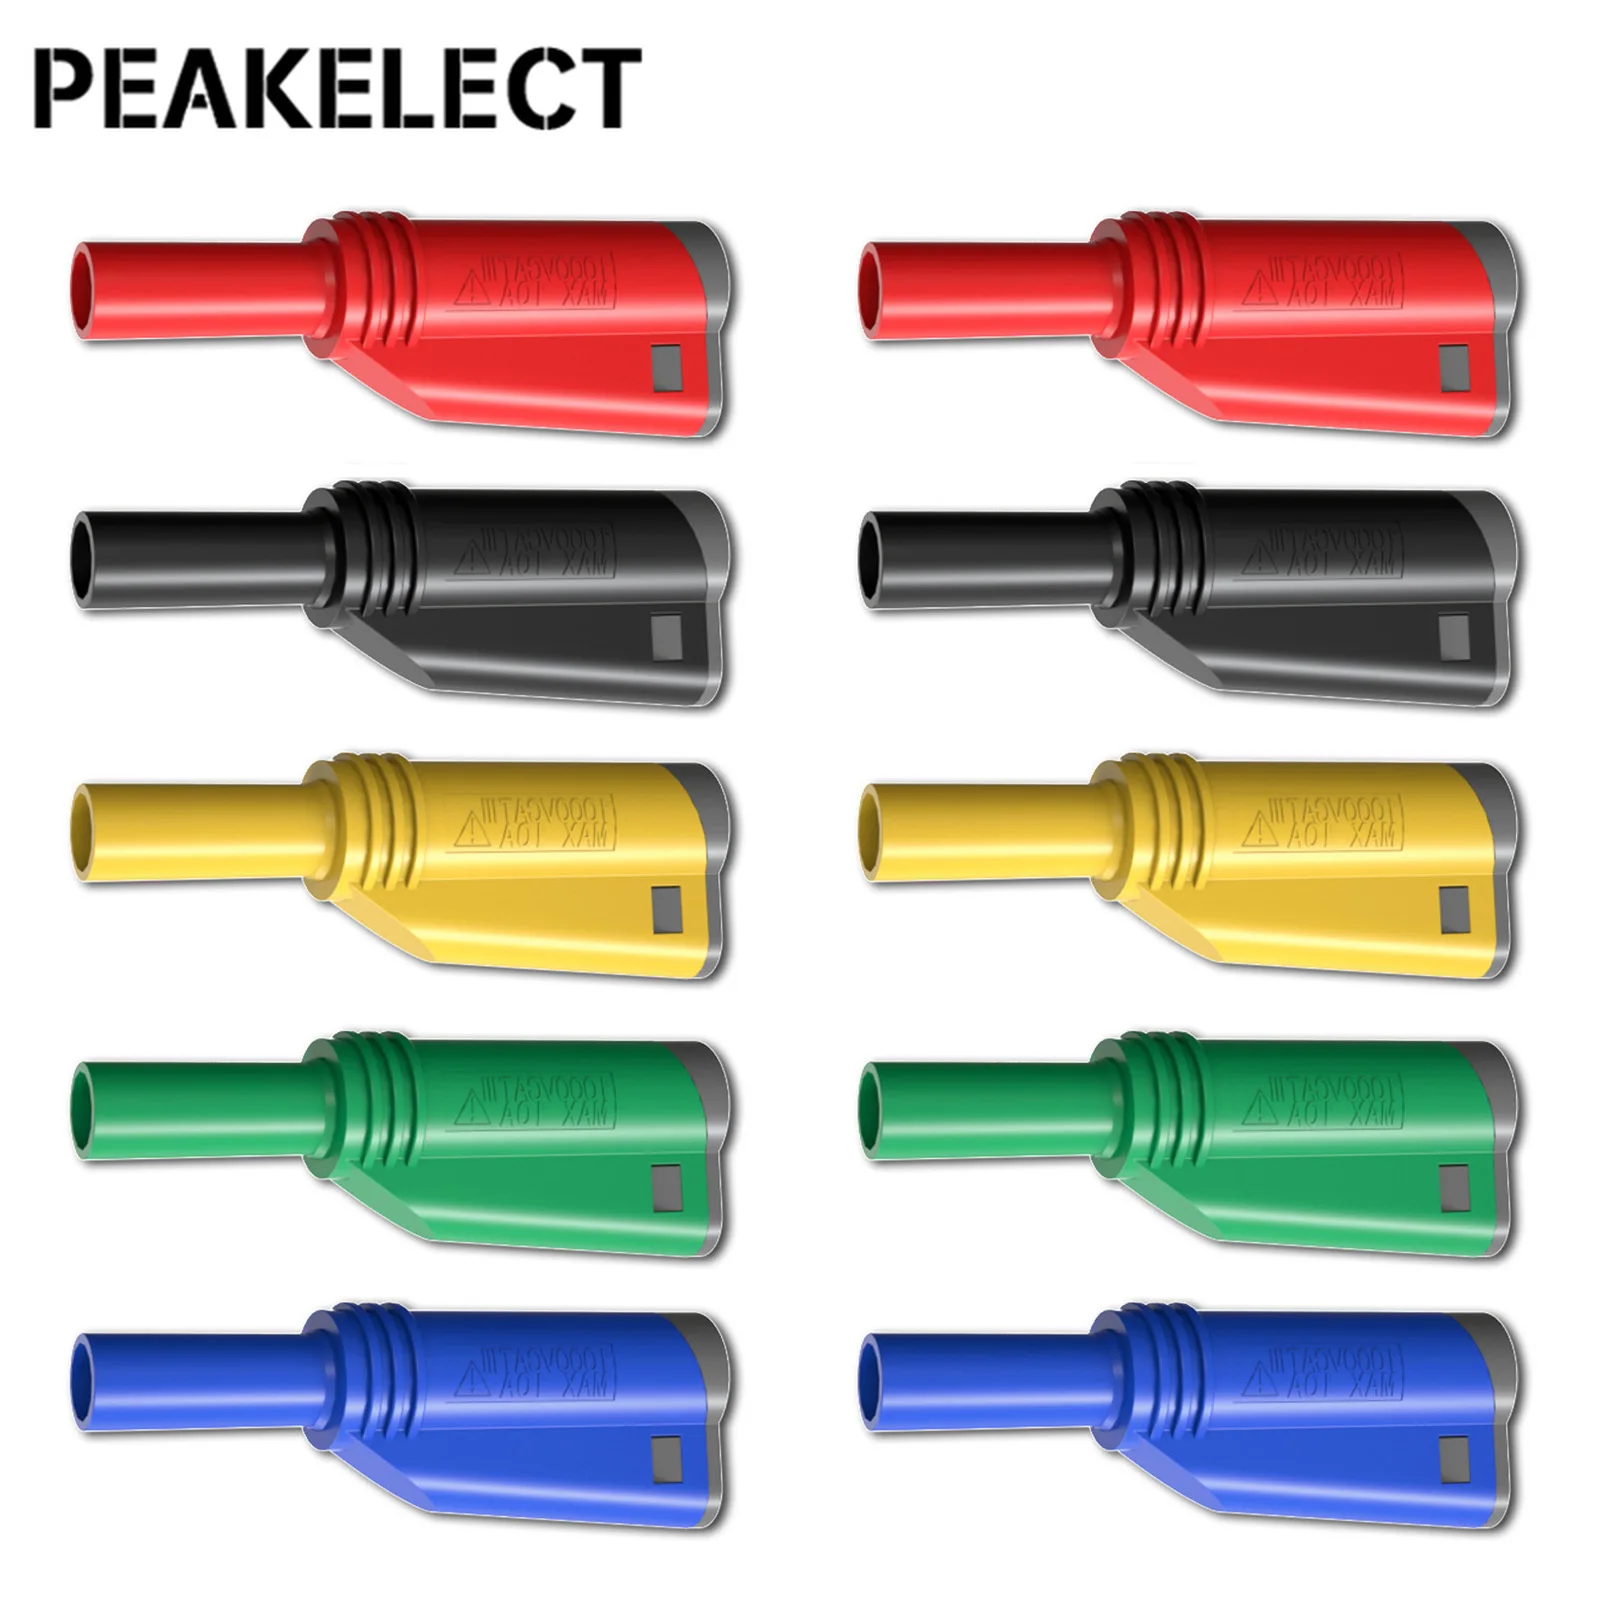 Peakelect P3005 Stackable Safe 4mm Banana Plug Solder/Assembly High Quality Welding-free Connector for Multimeter Testing 30kg rotary welding positioner turntable table high positioning accuracy suitable for cutting grinding assembly